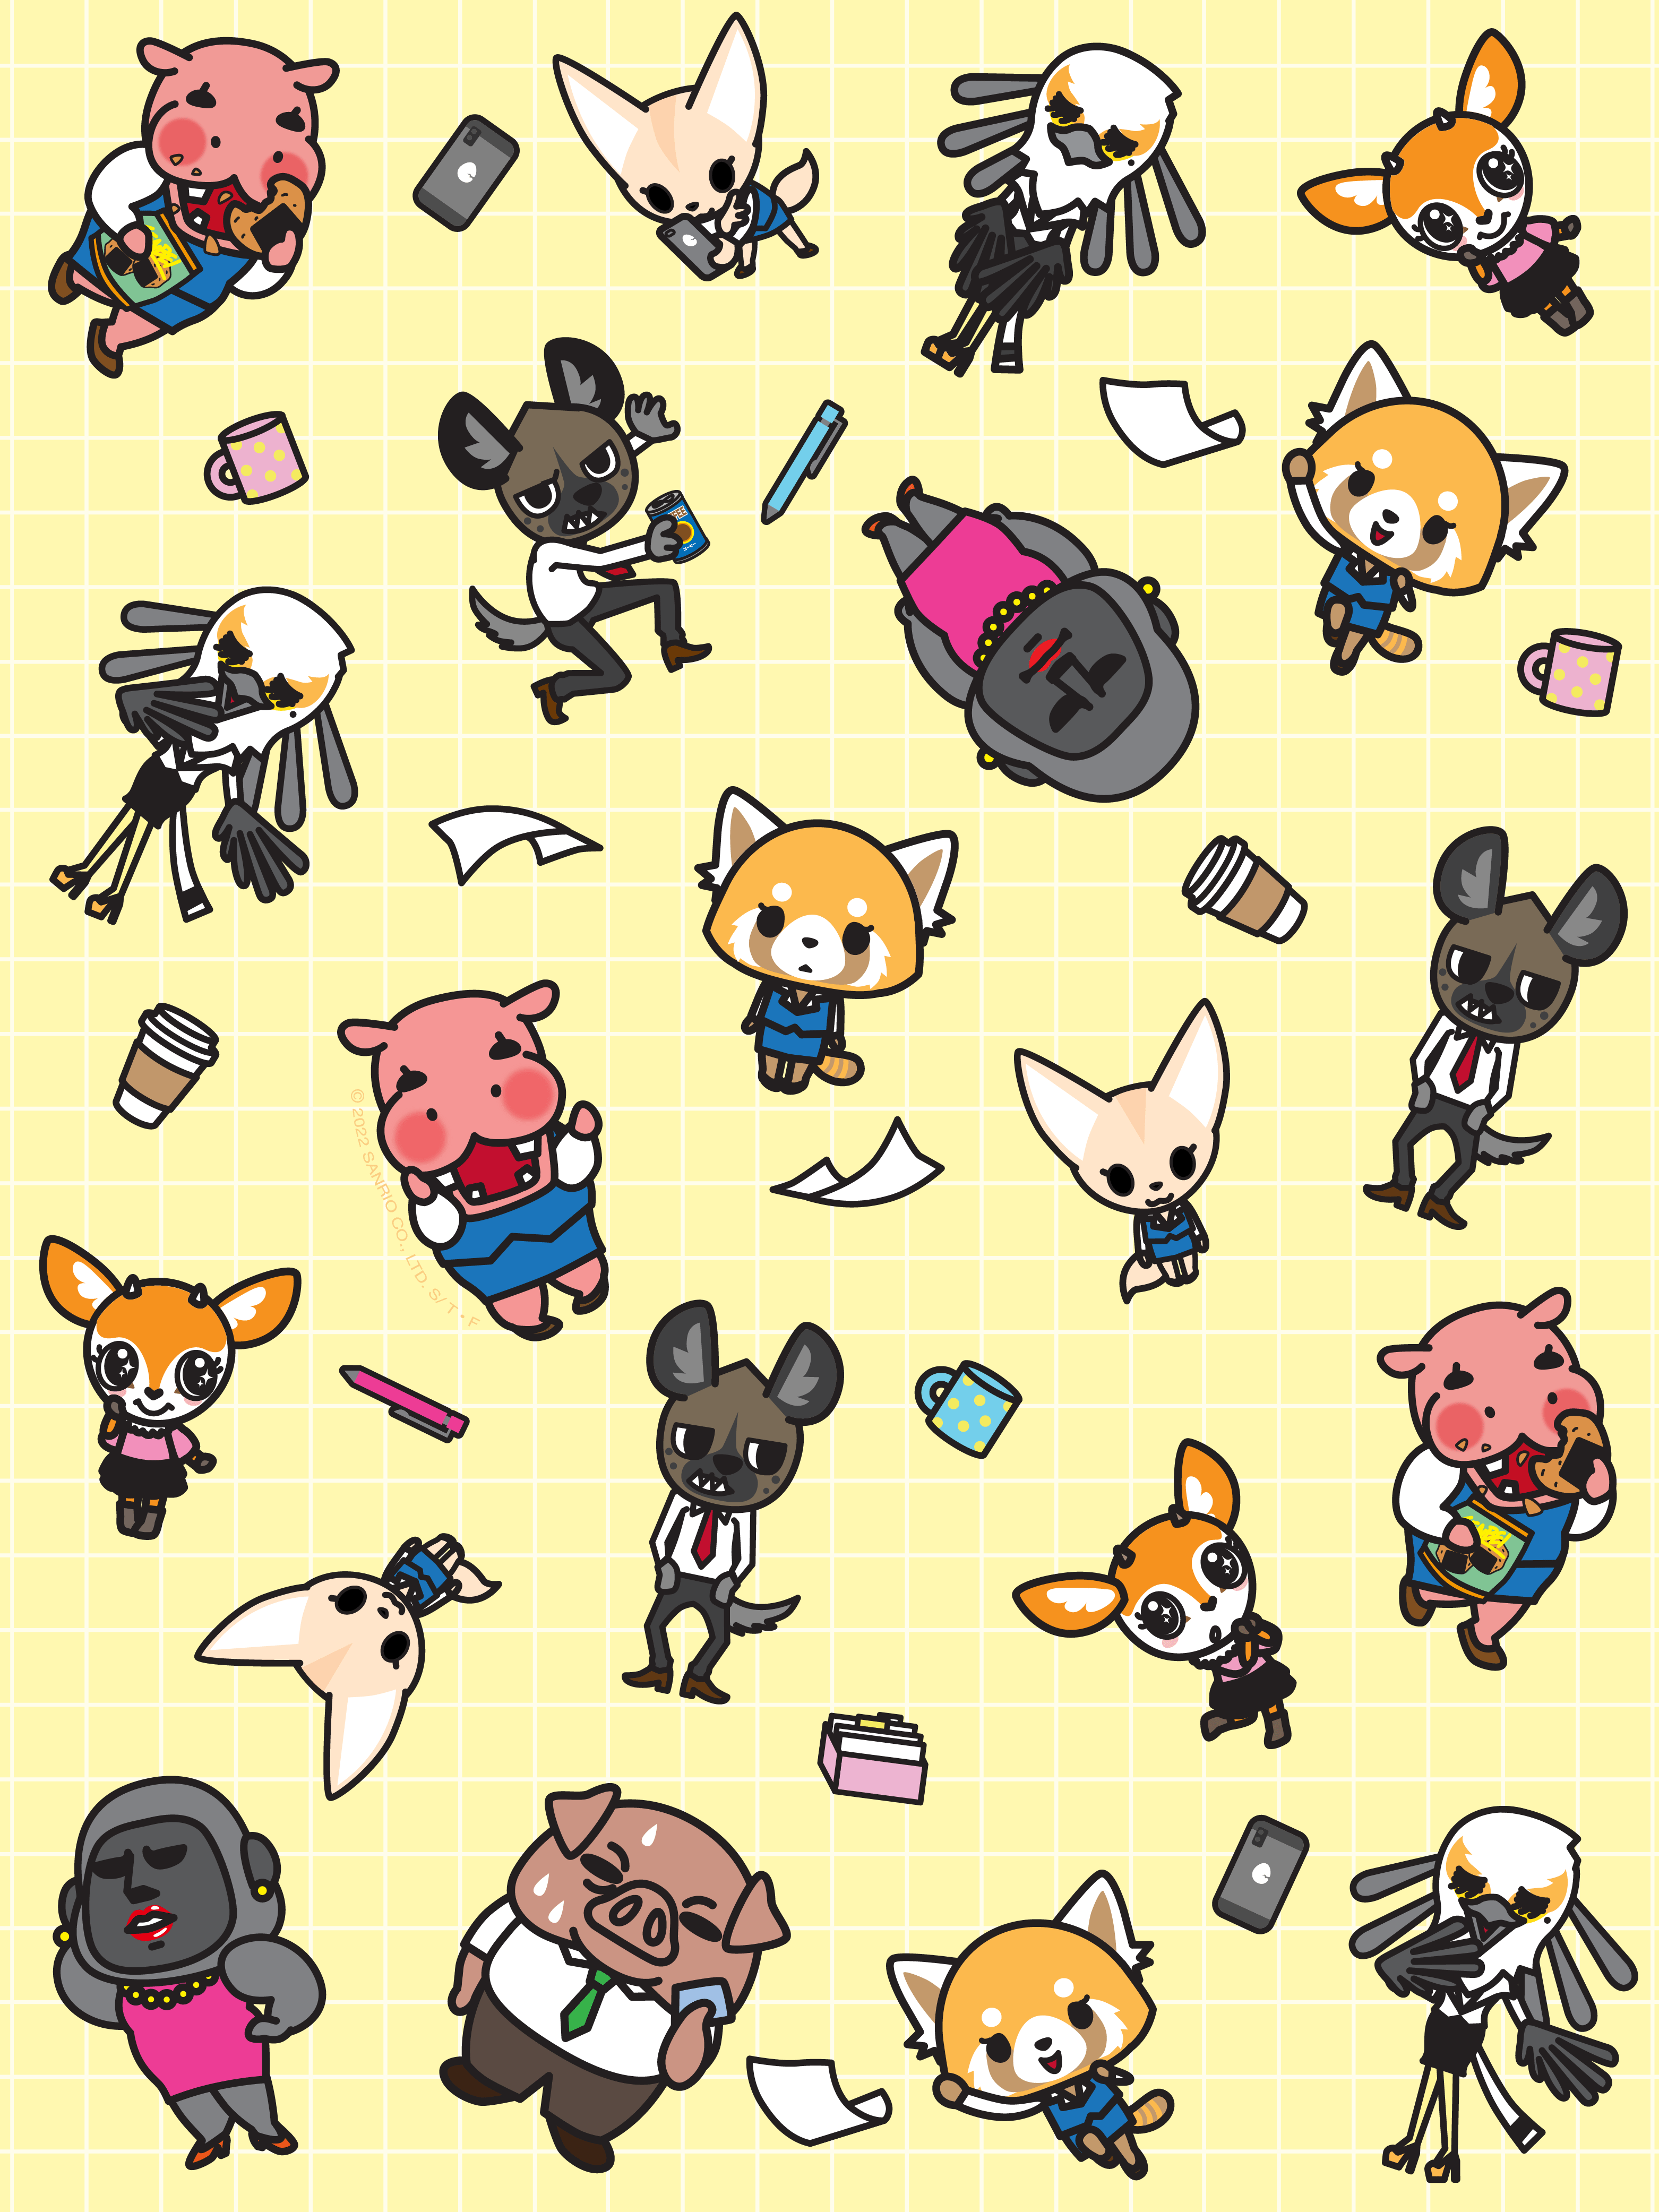 An illustration of various animals dressed as office workers. - Sanrio